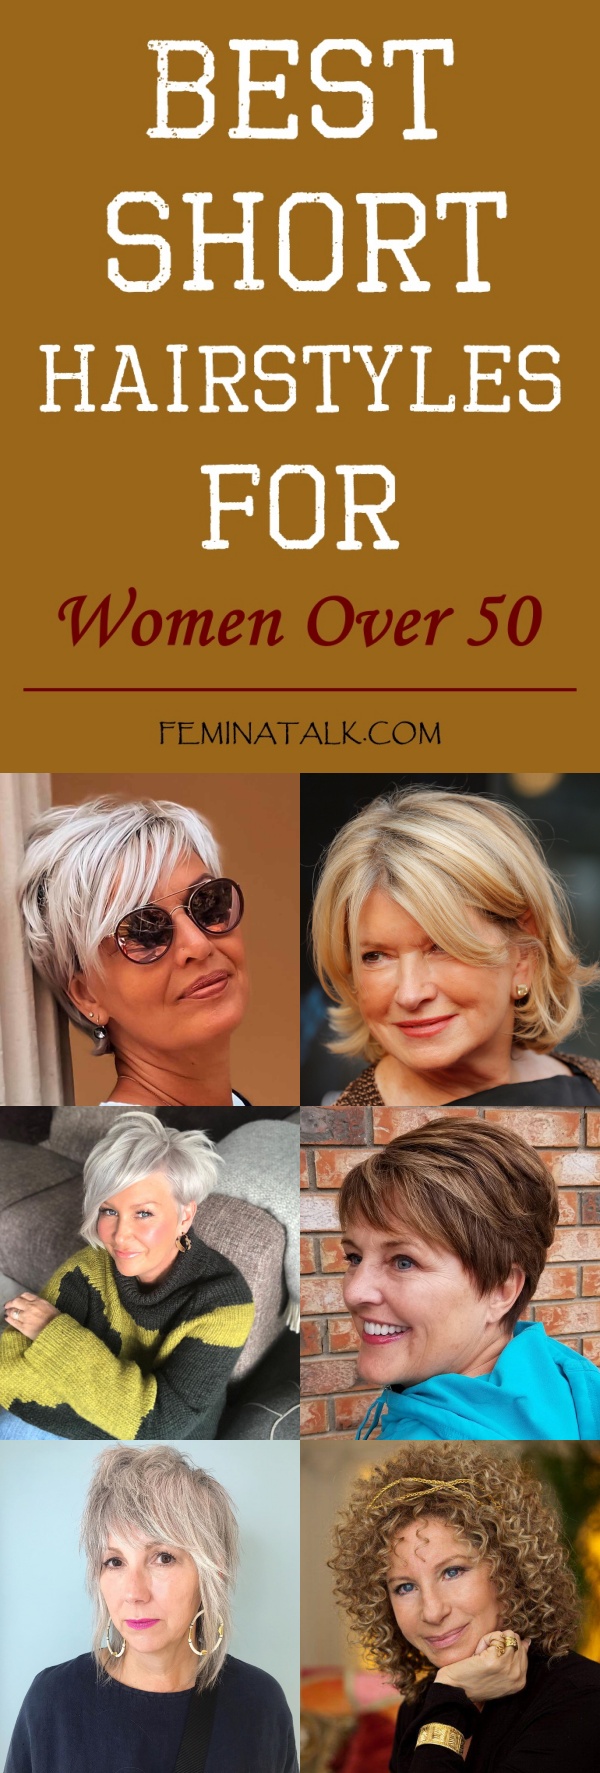 40 Best Hairstyles for Women over 50 | Stylish and youthful hairstyles for  older women - Best … | Modern short hairstyles, Thick hair styles, Short  hair older women